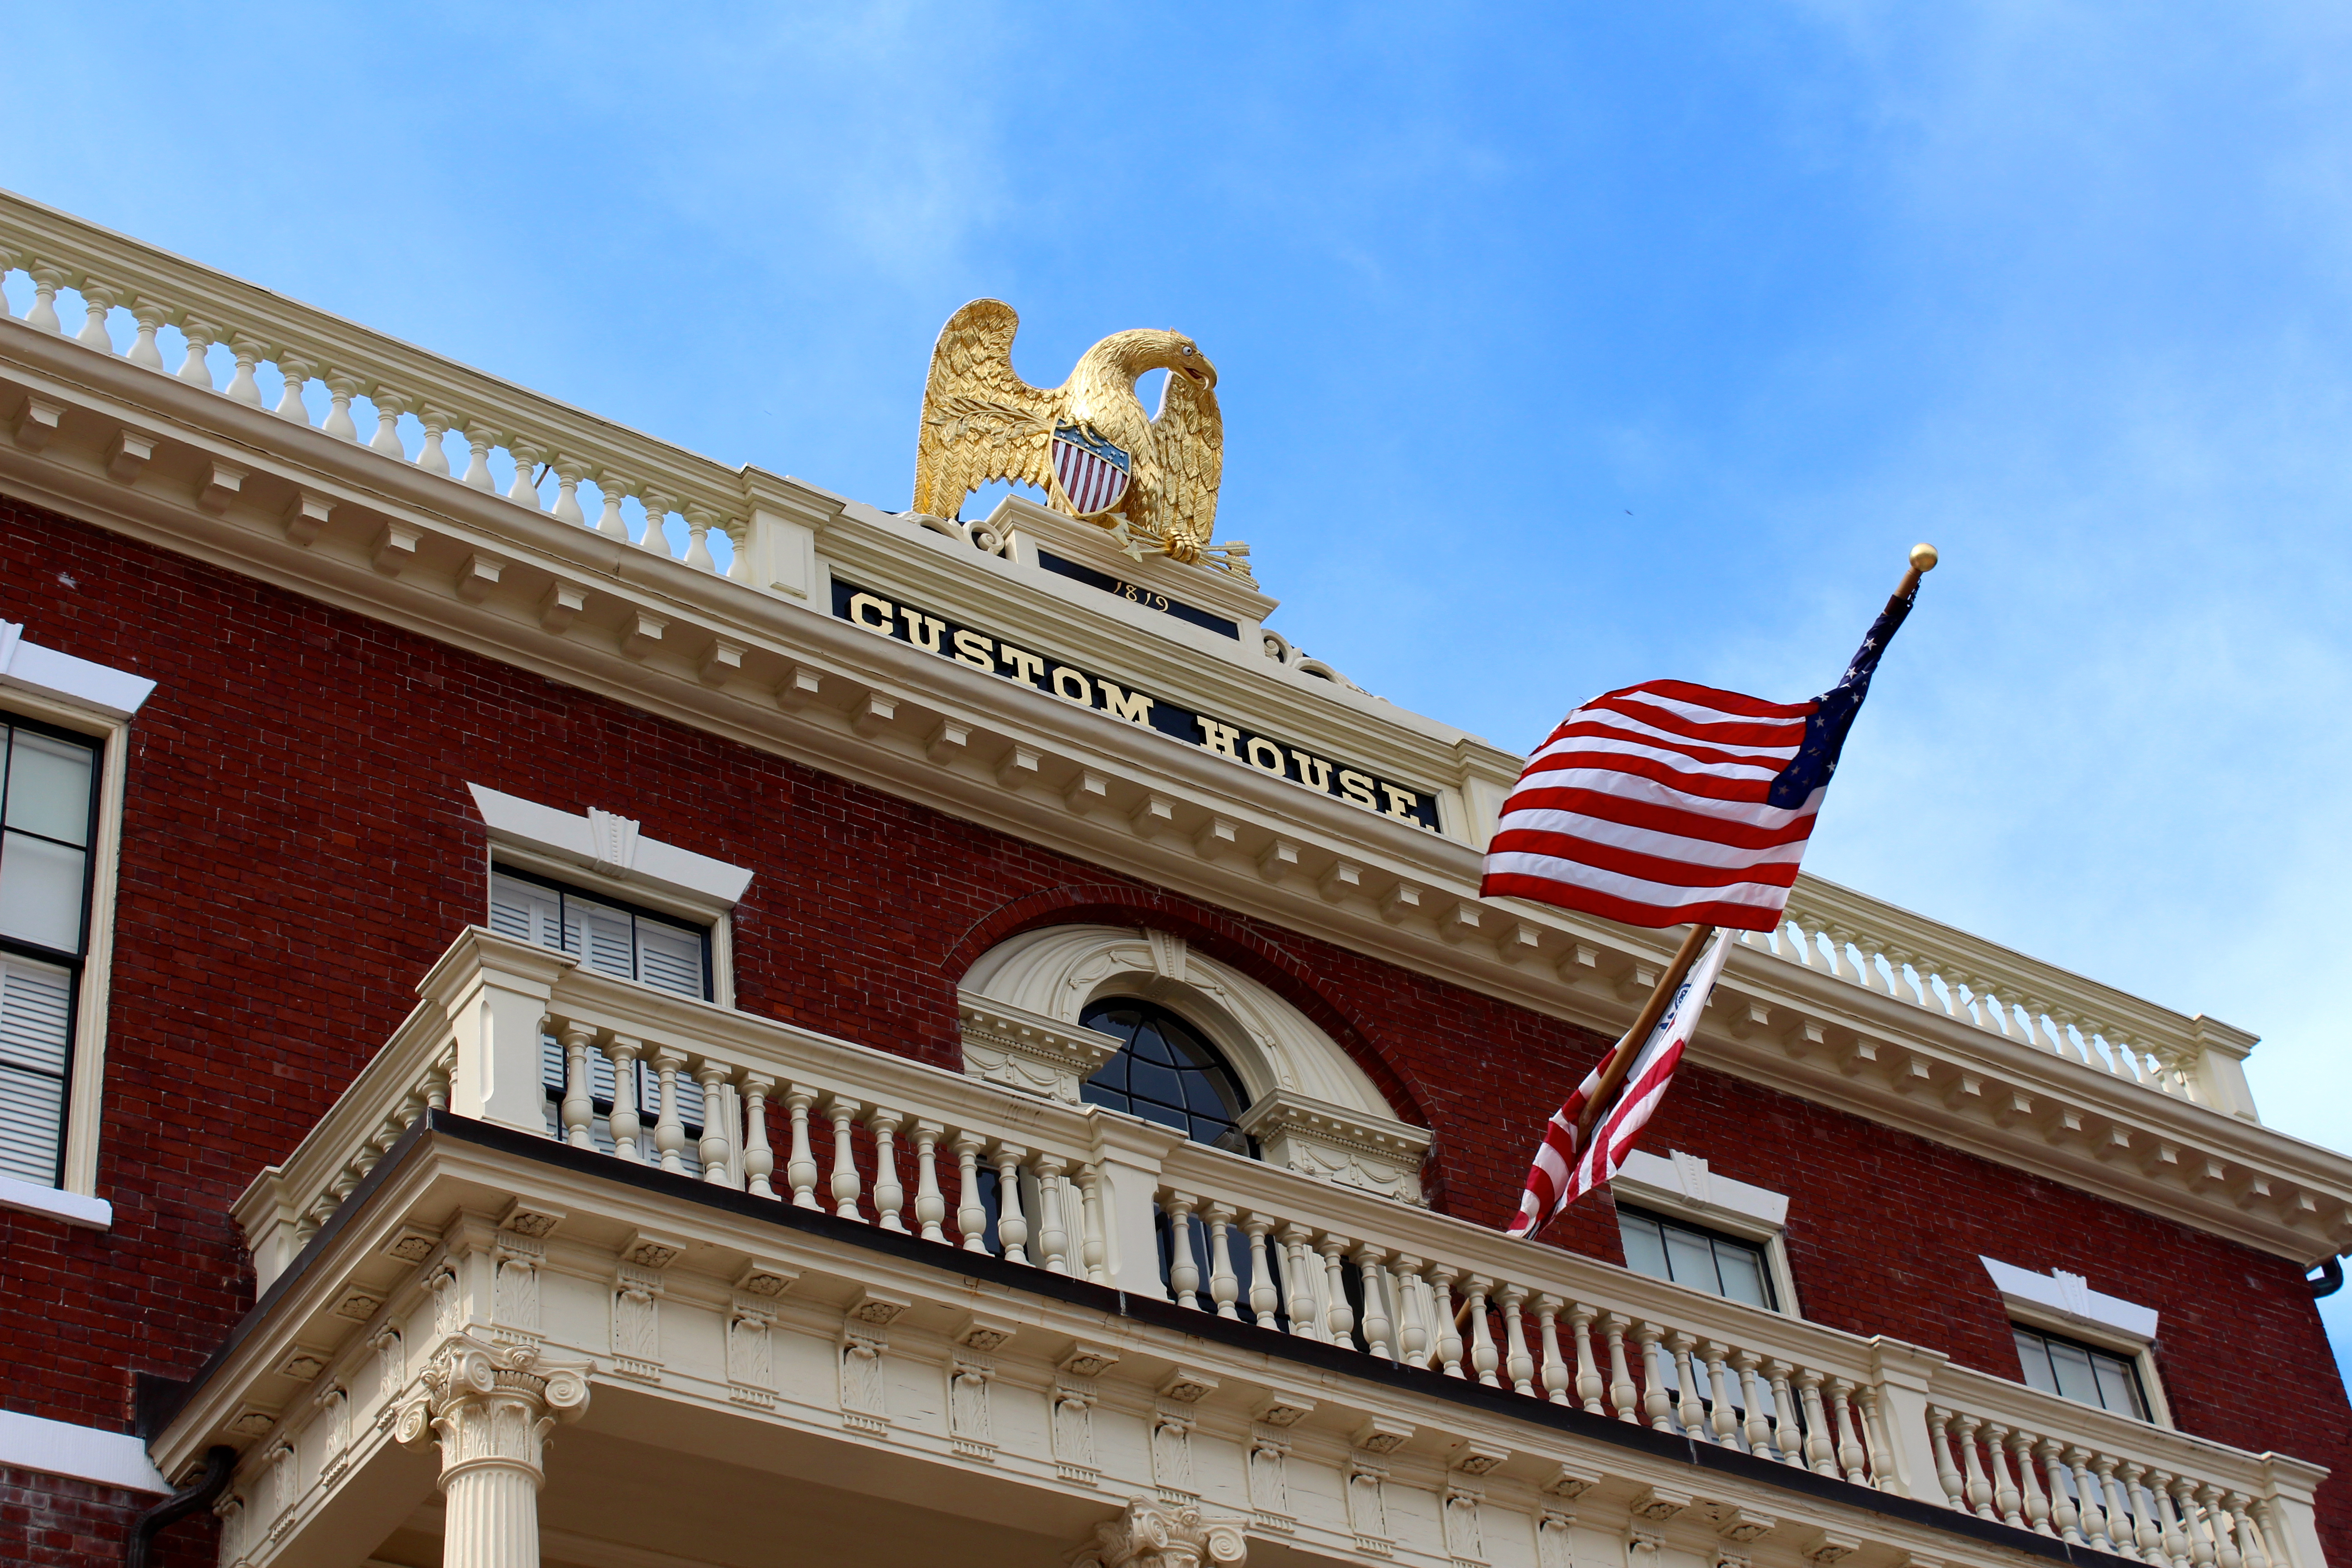 The Customs House in Salem.  Salem is one of the oldest shipping ports in the U.S.